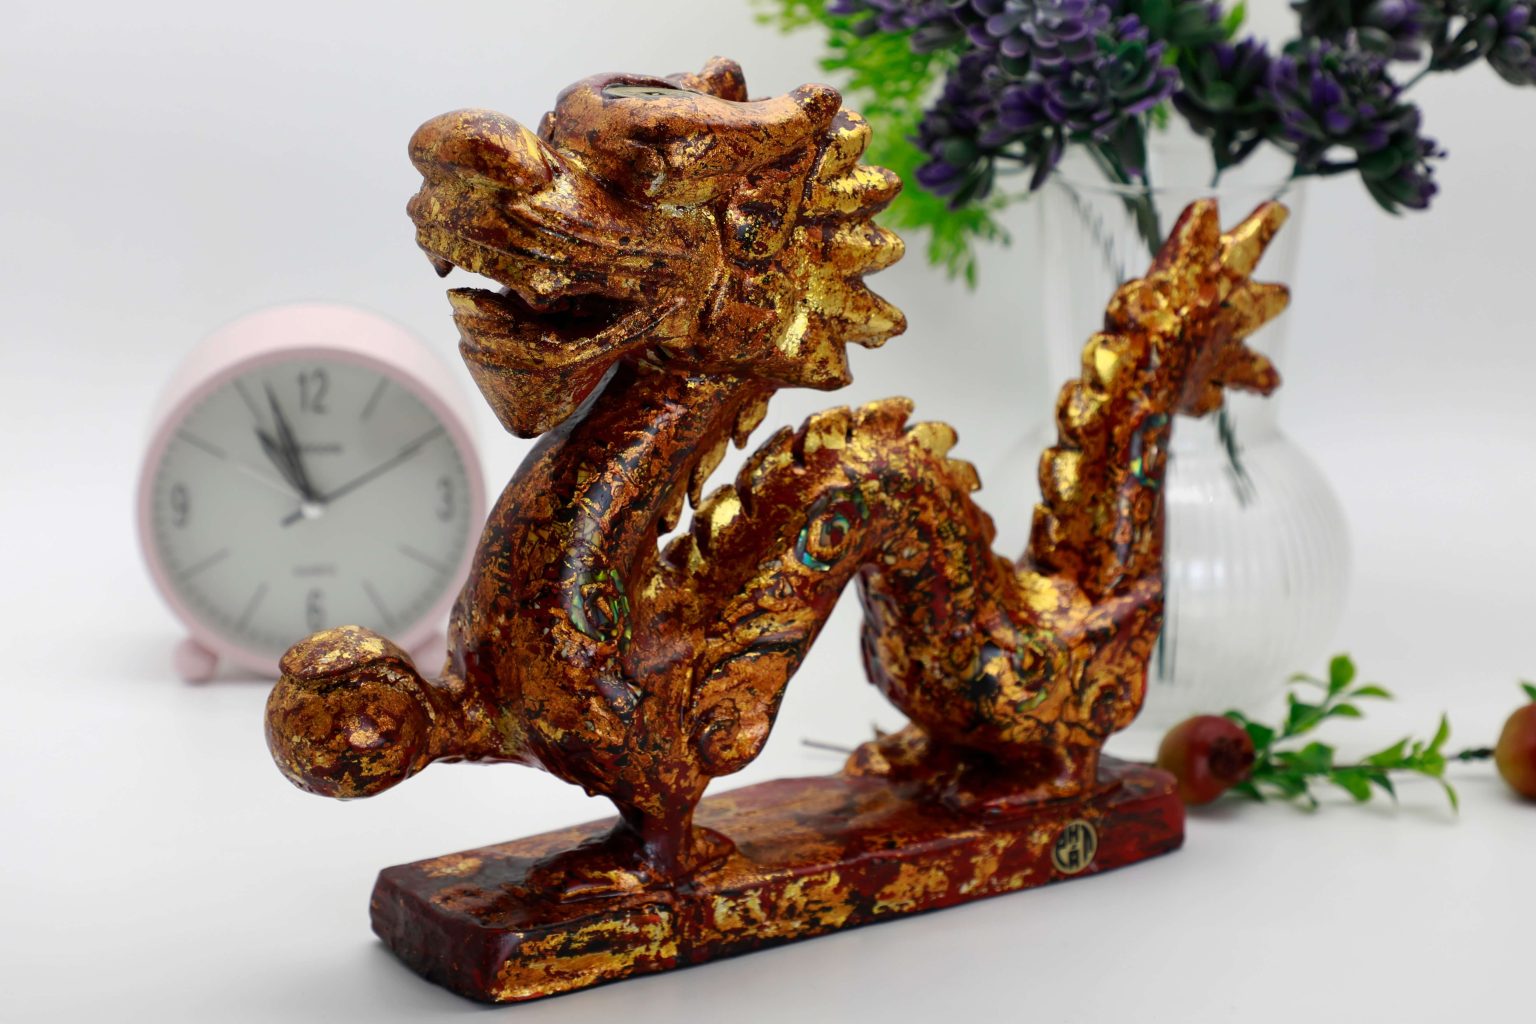 First Dragon Embraces Jade II - Vietnamese Lacquer Artwork by Artist Nguyen Tan Phat